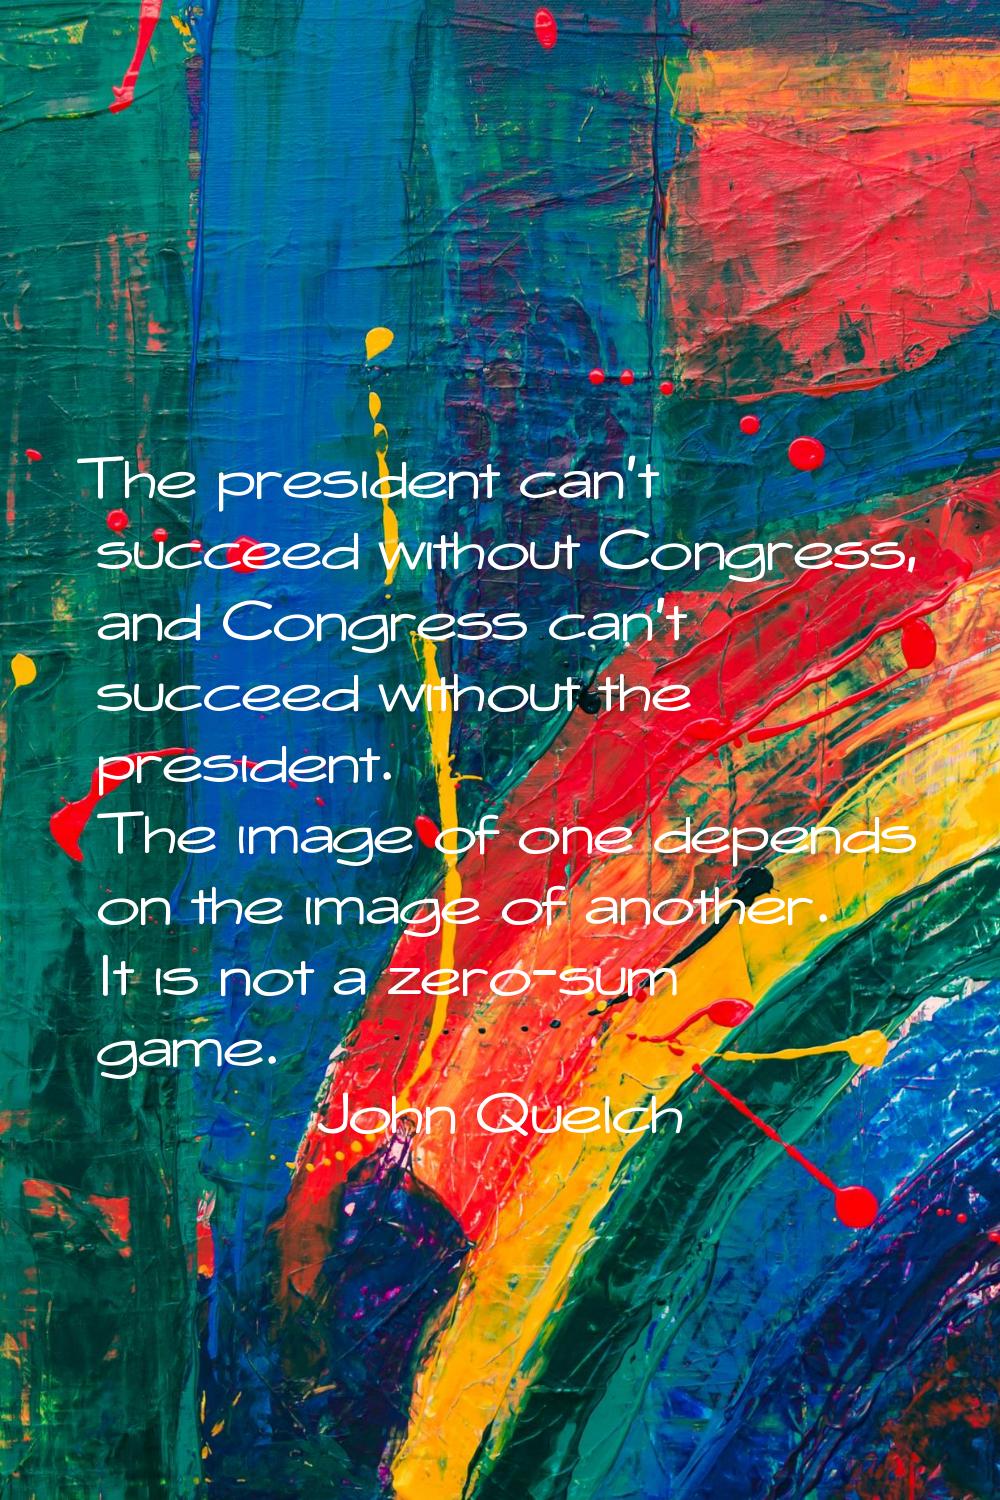 The president can't succeed without Congress, and Congress can't succeed without the president. The